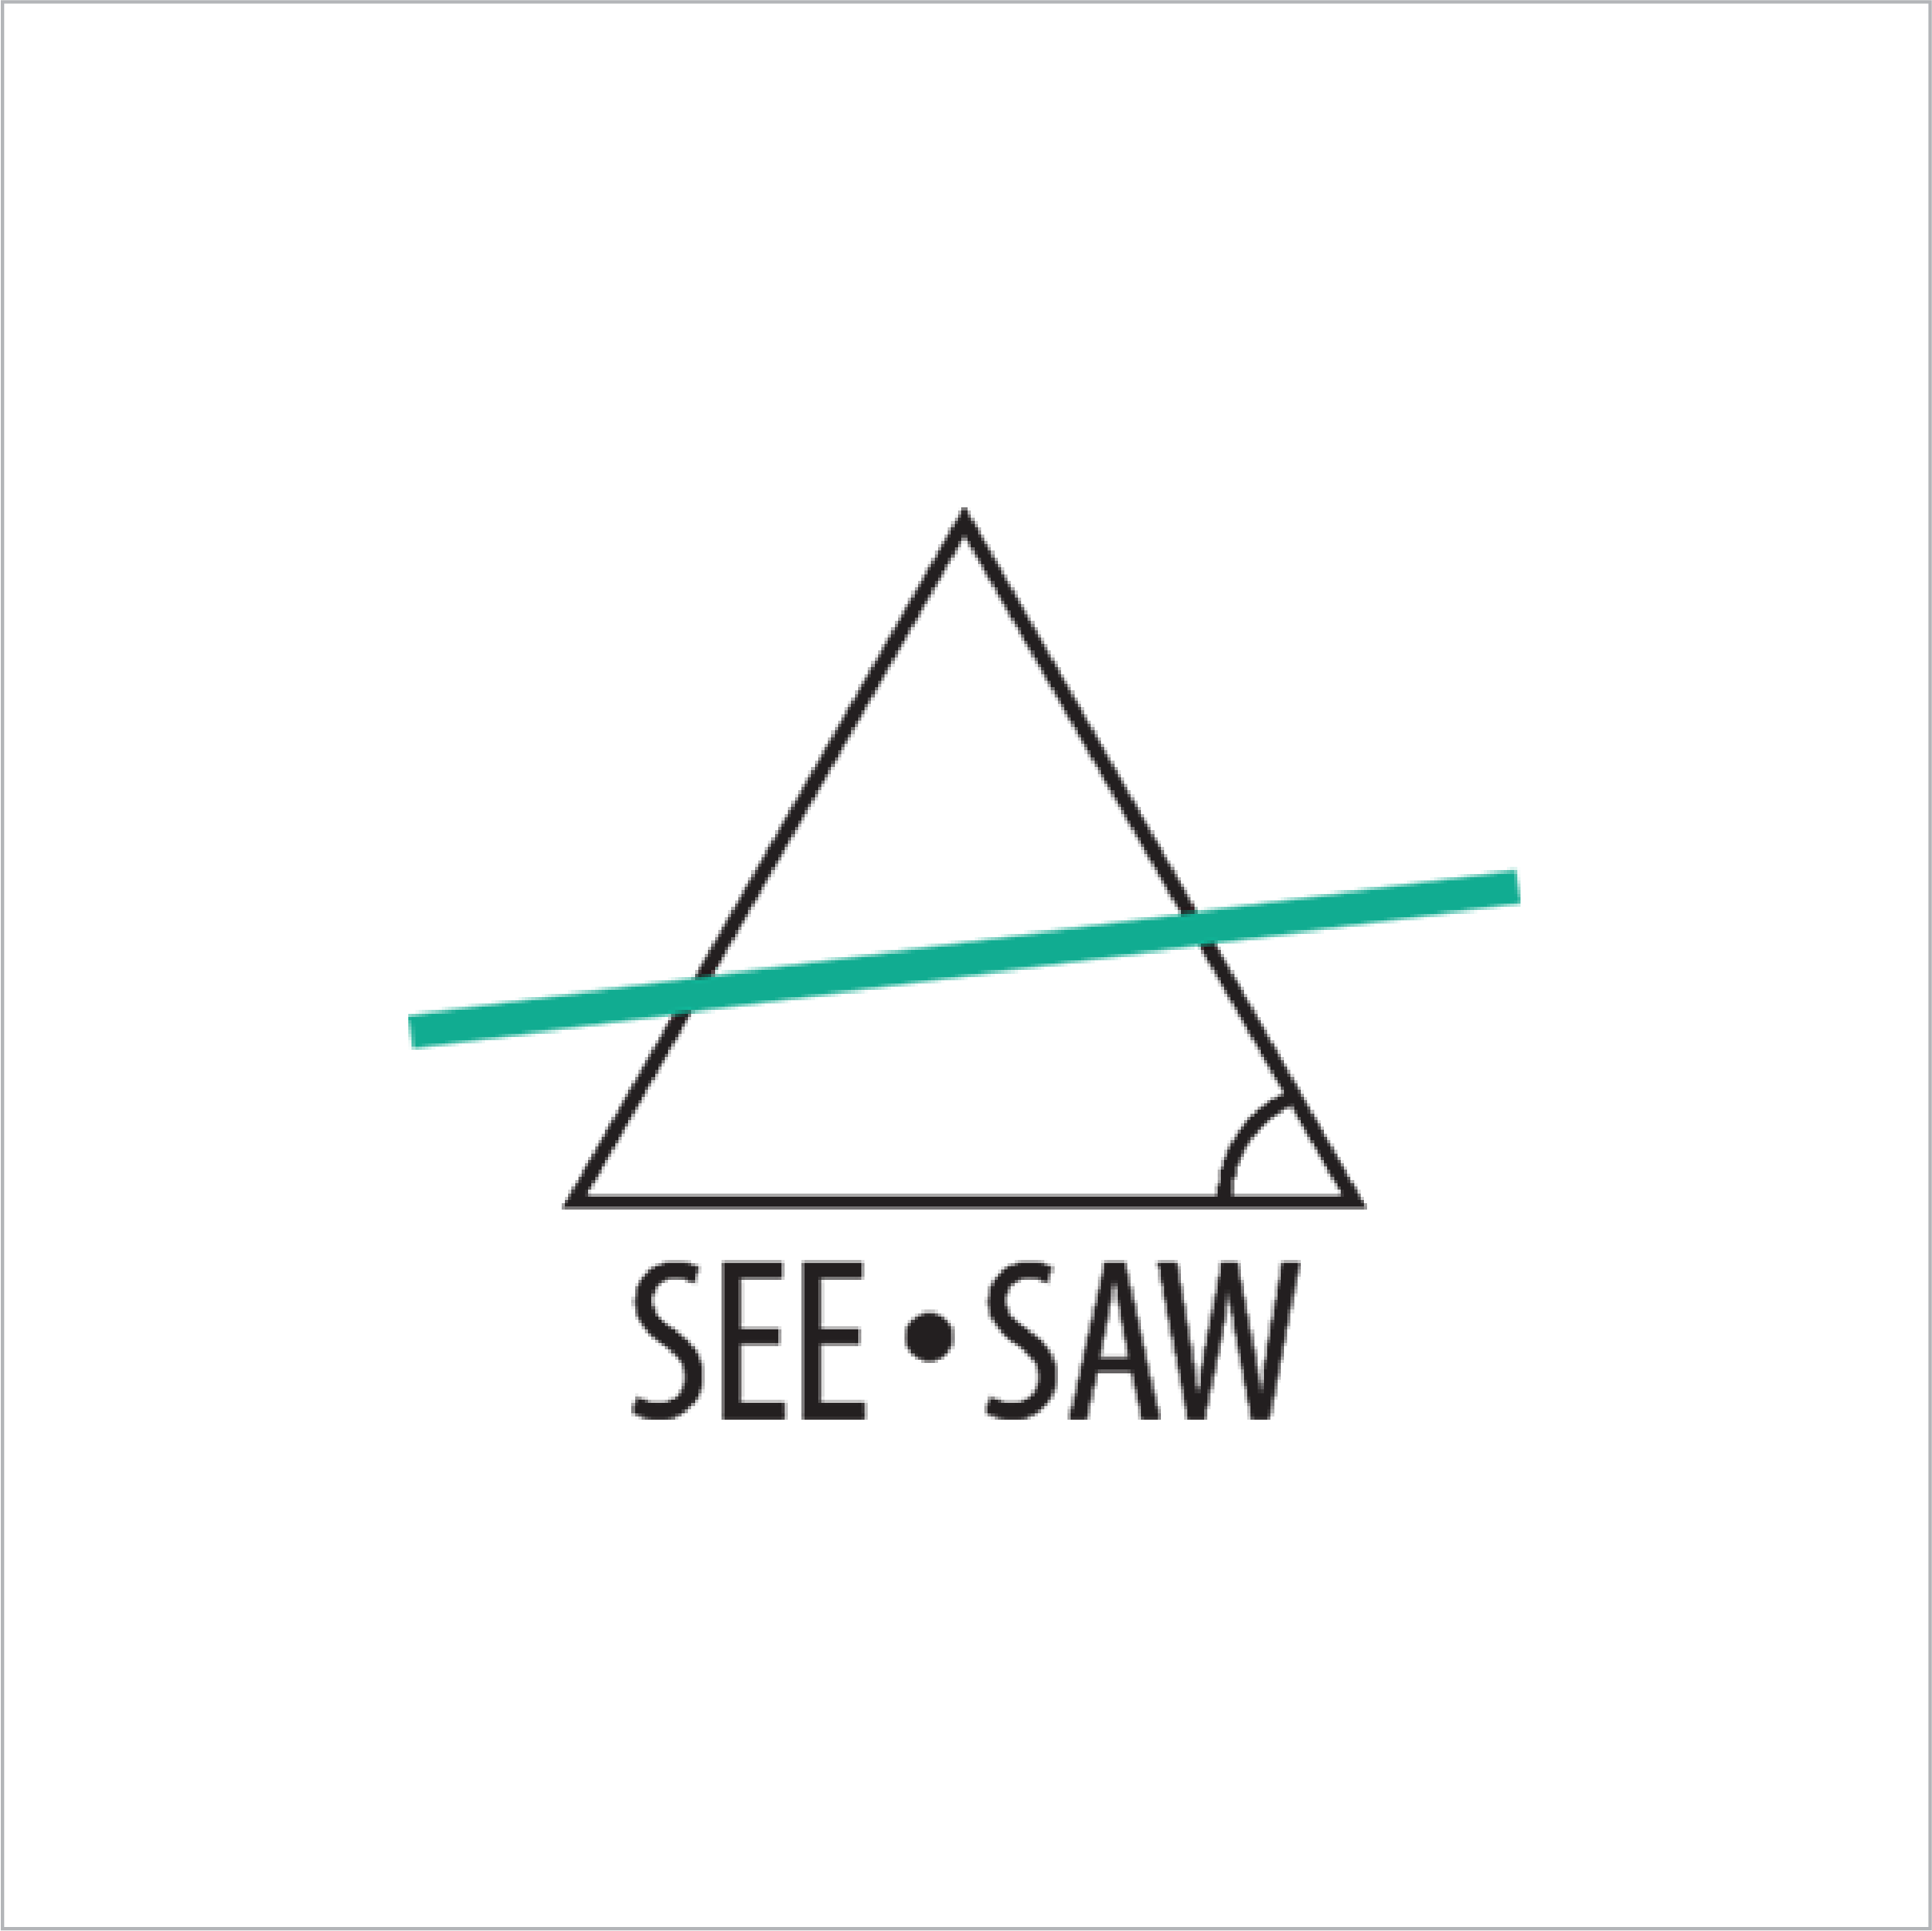 See·Saw